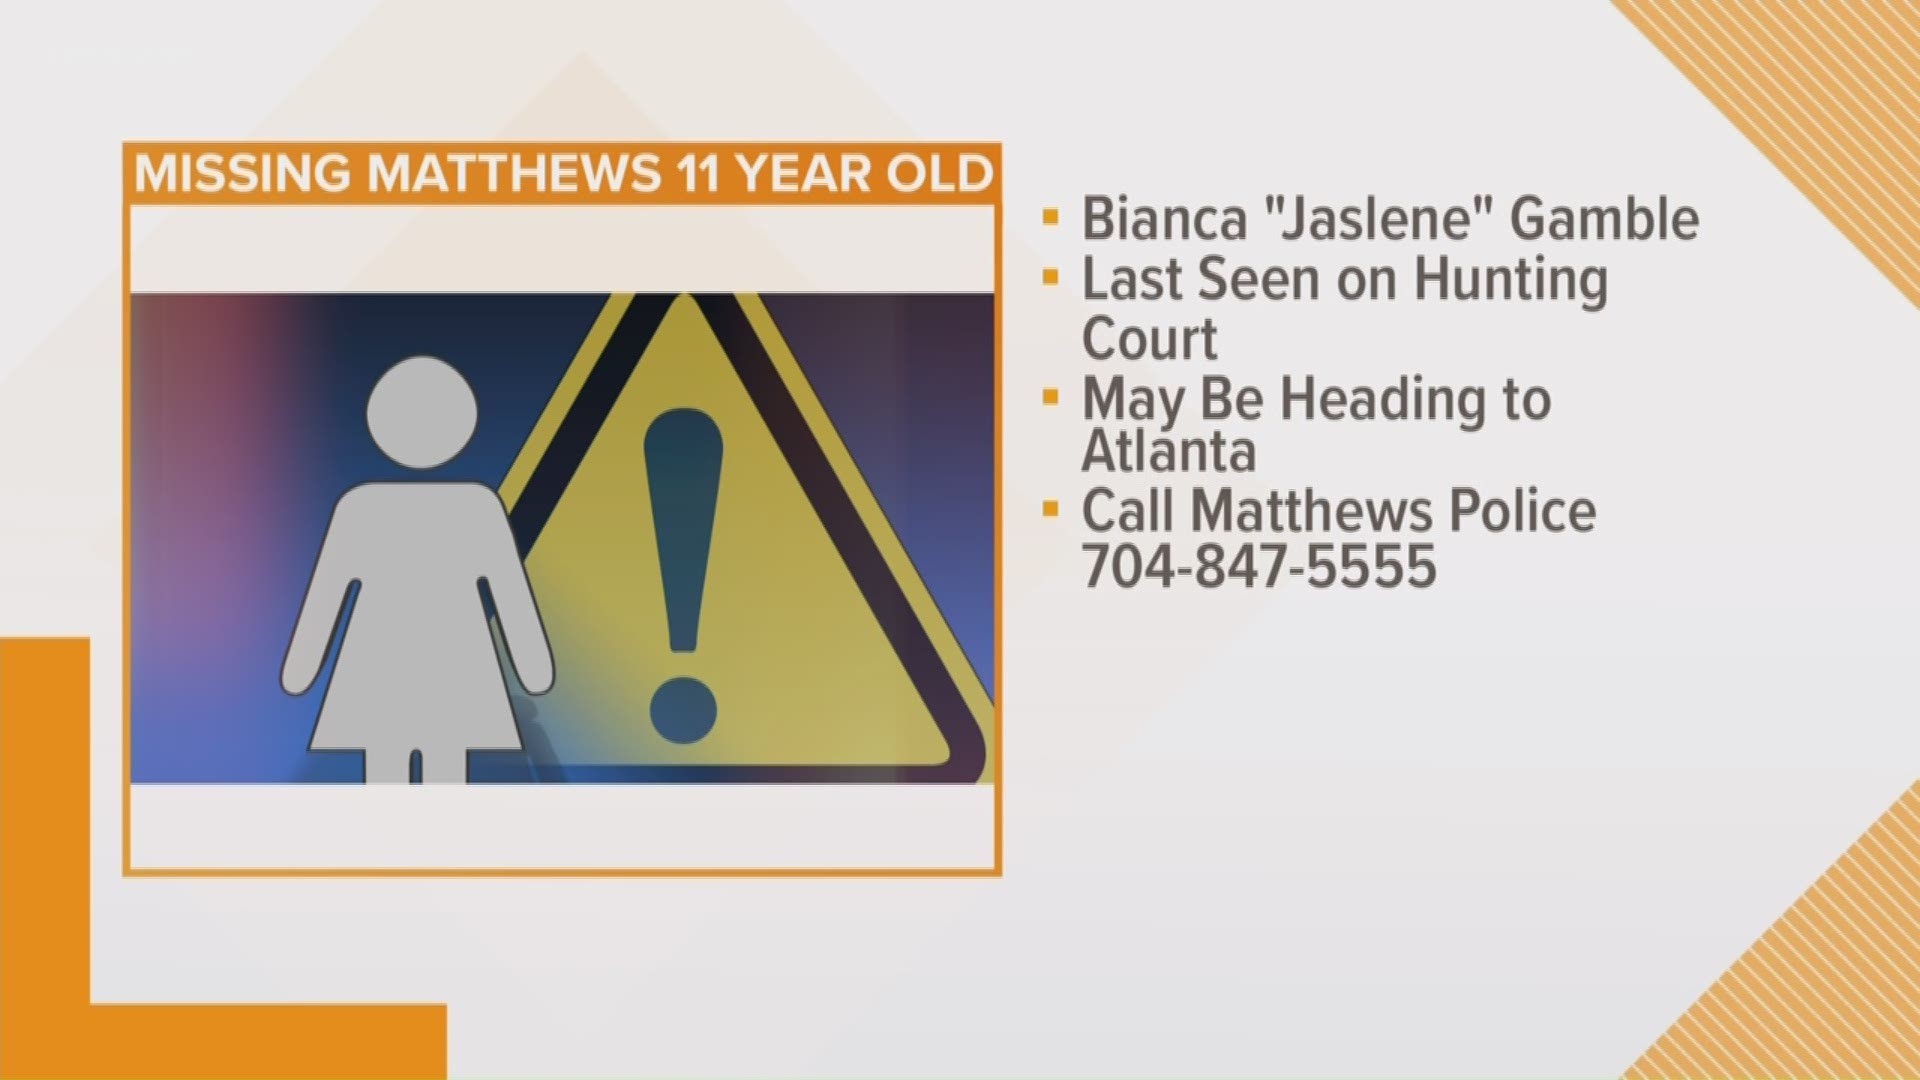 Bianca Gamble goes by the nickname Jaslene. At this time, officials have not released a picture of Gamble.